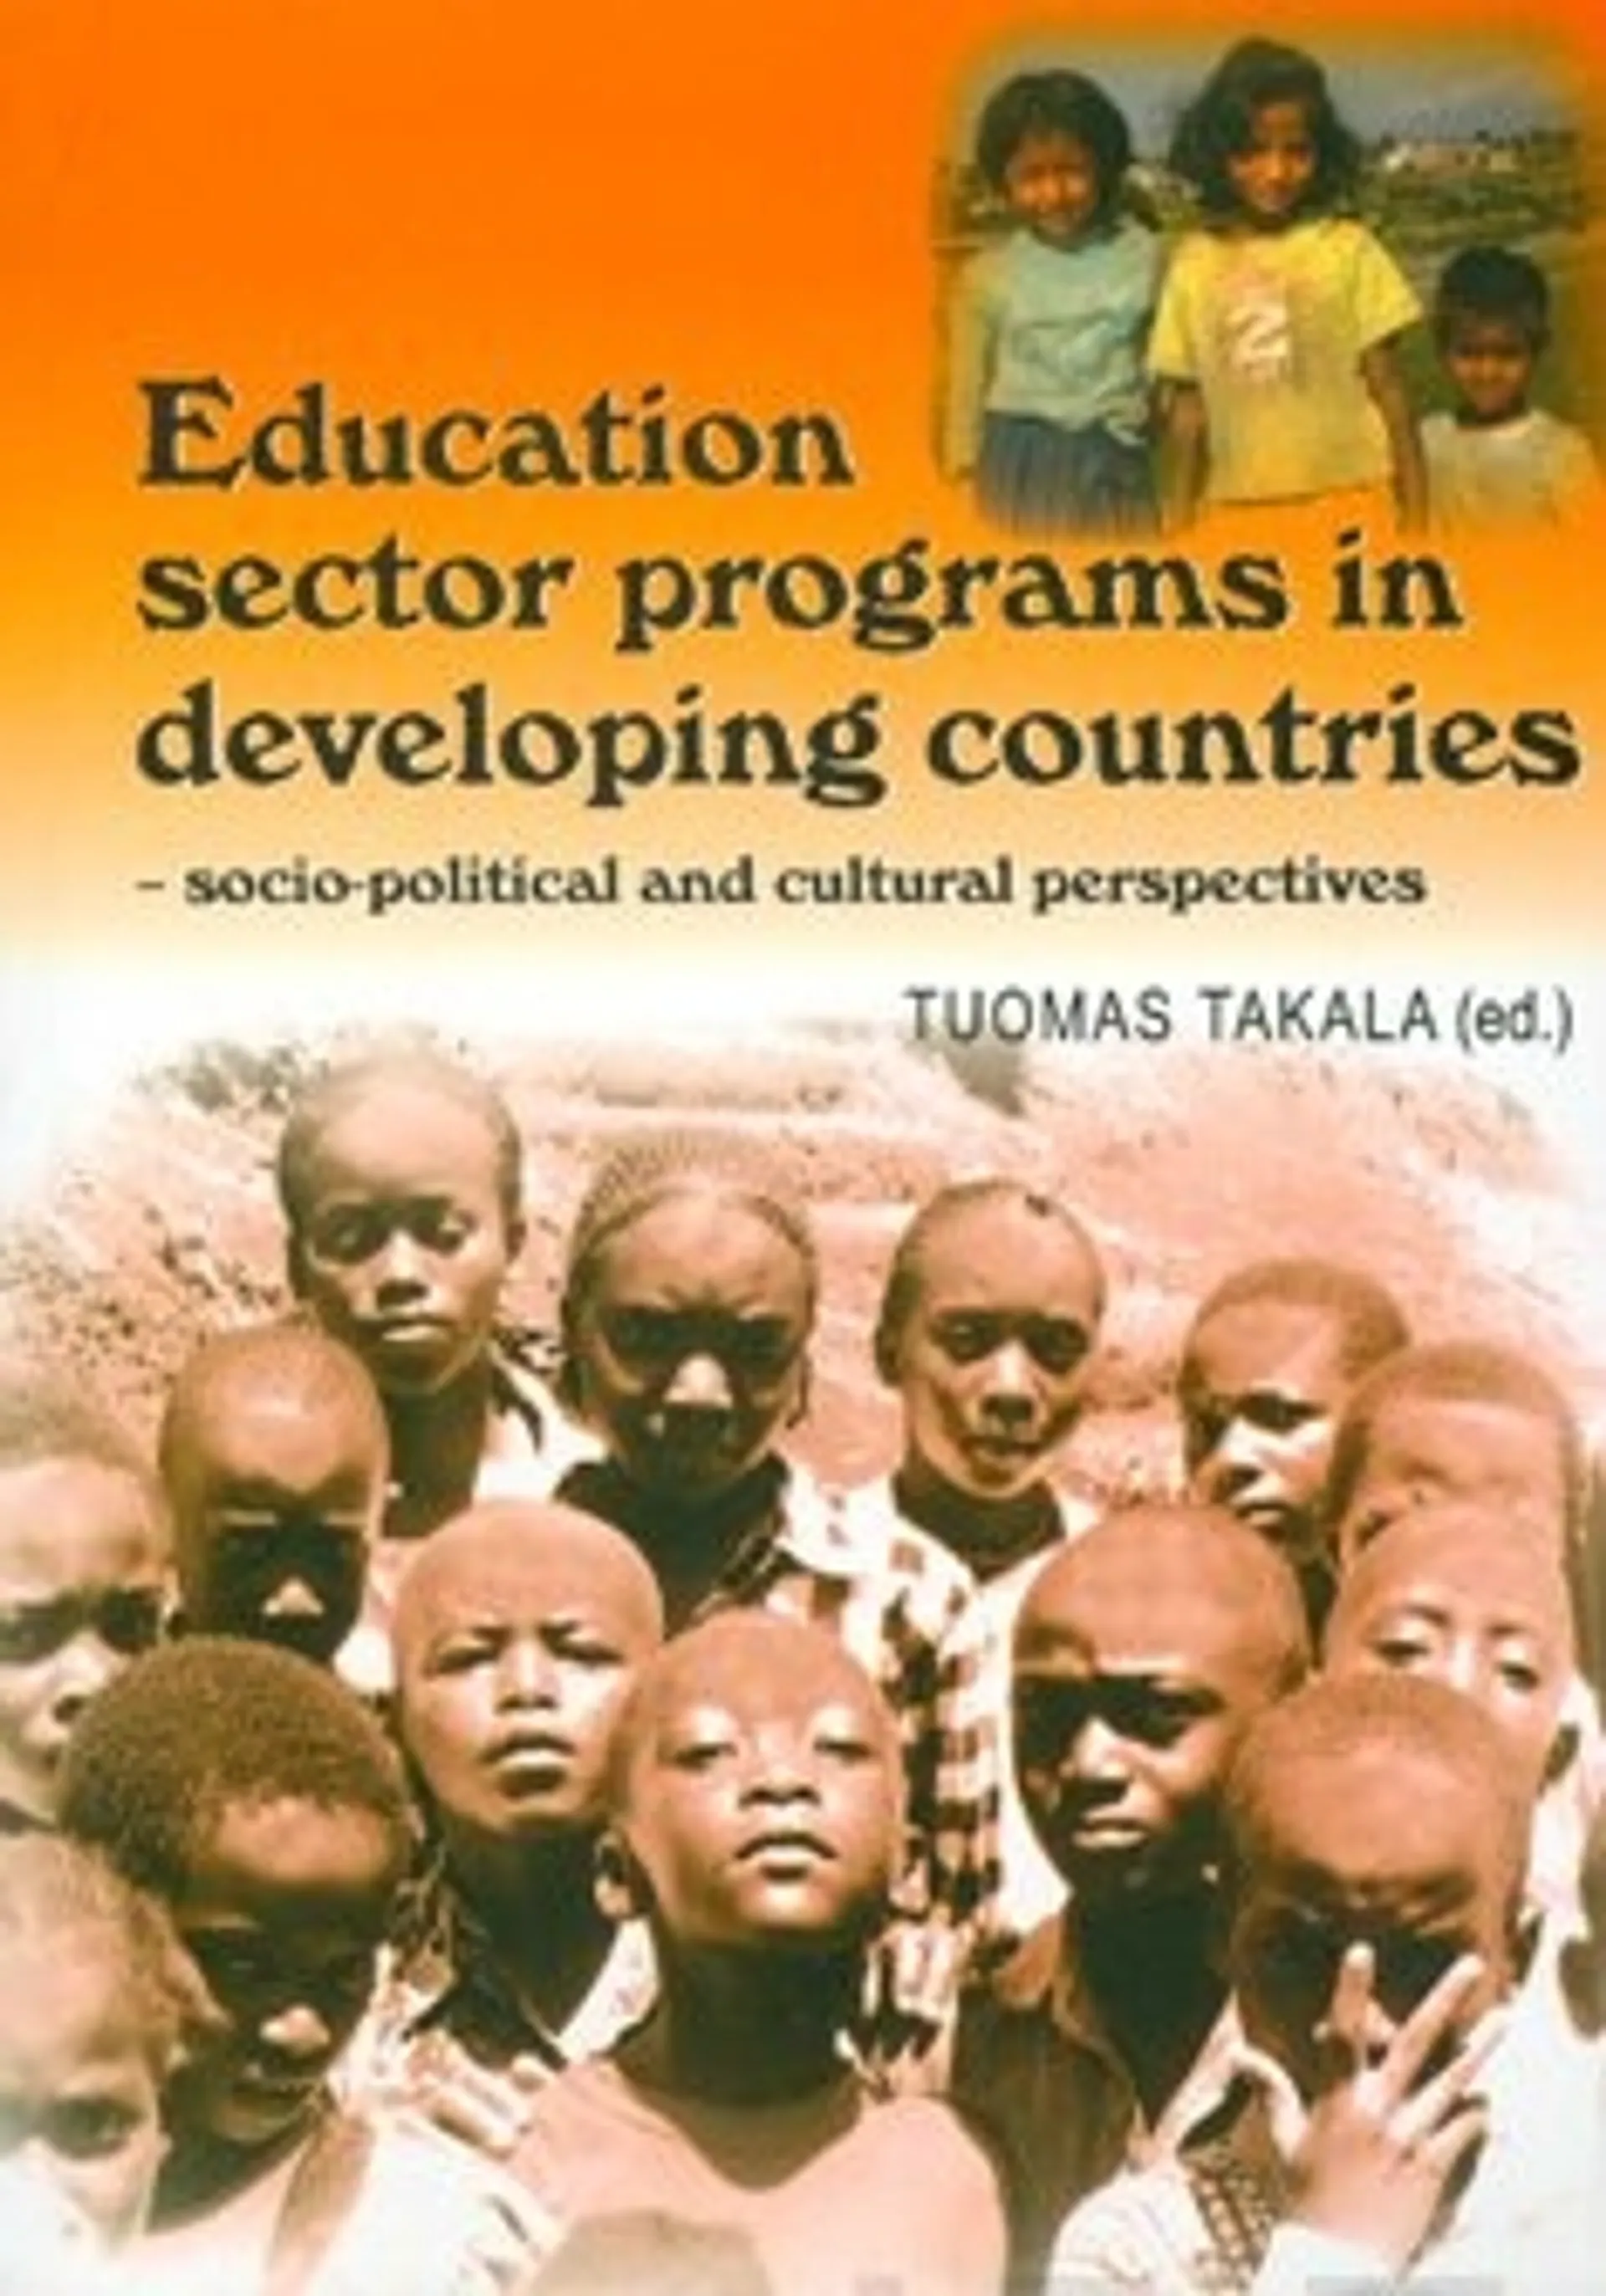 Education sector programs in developing countries